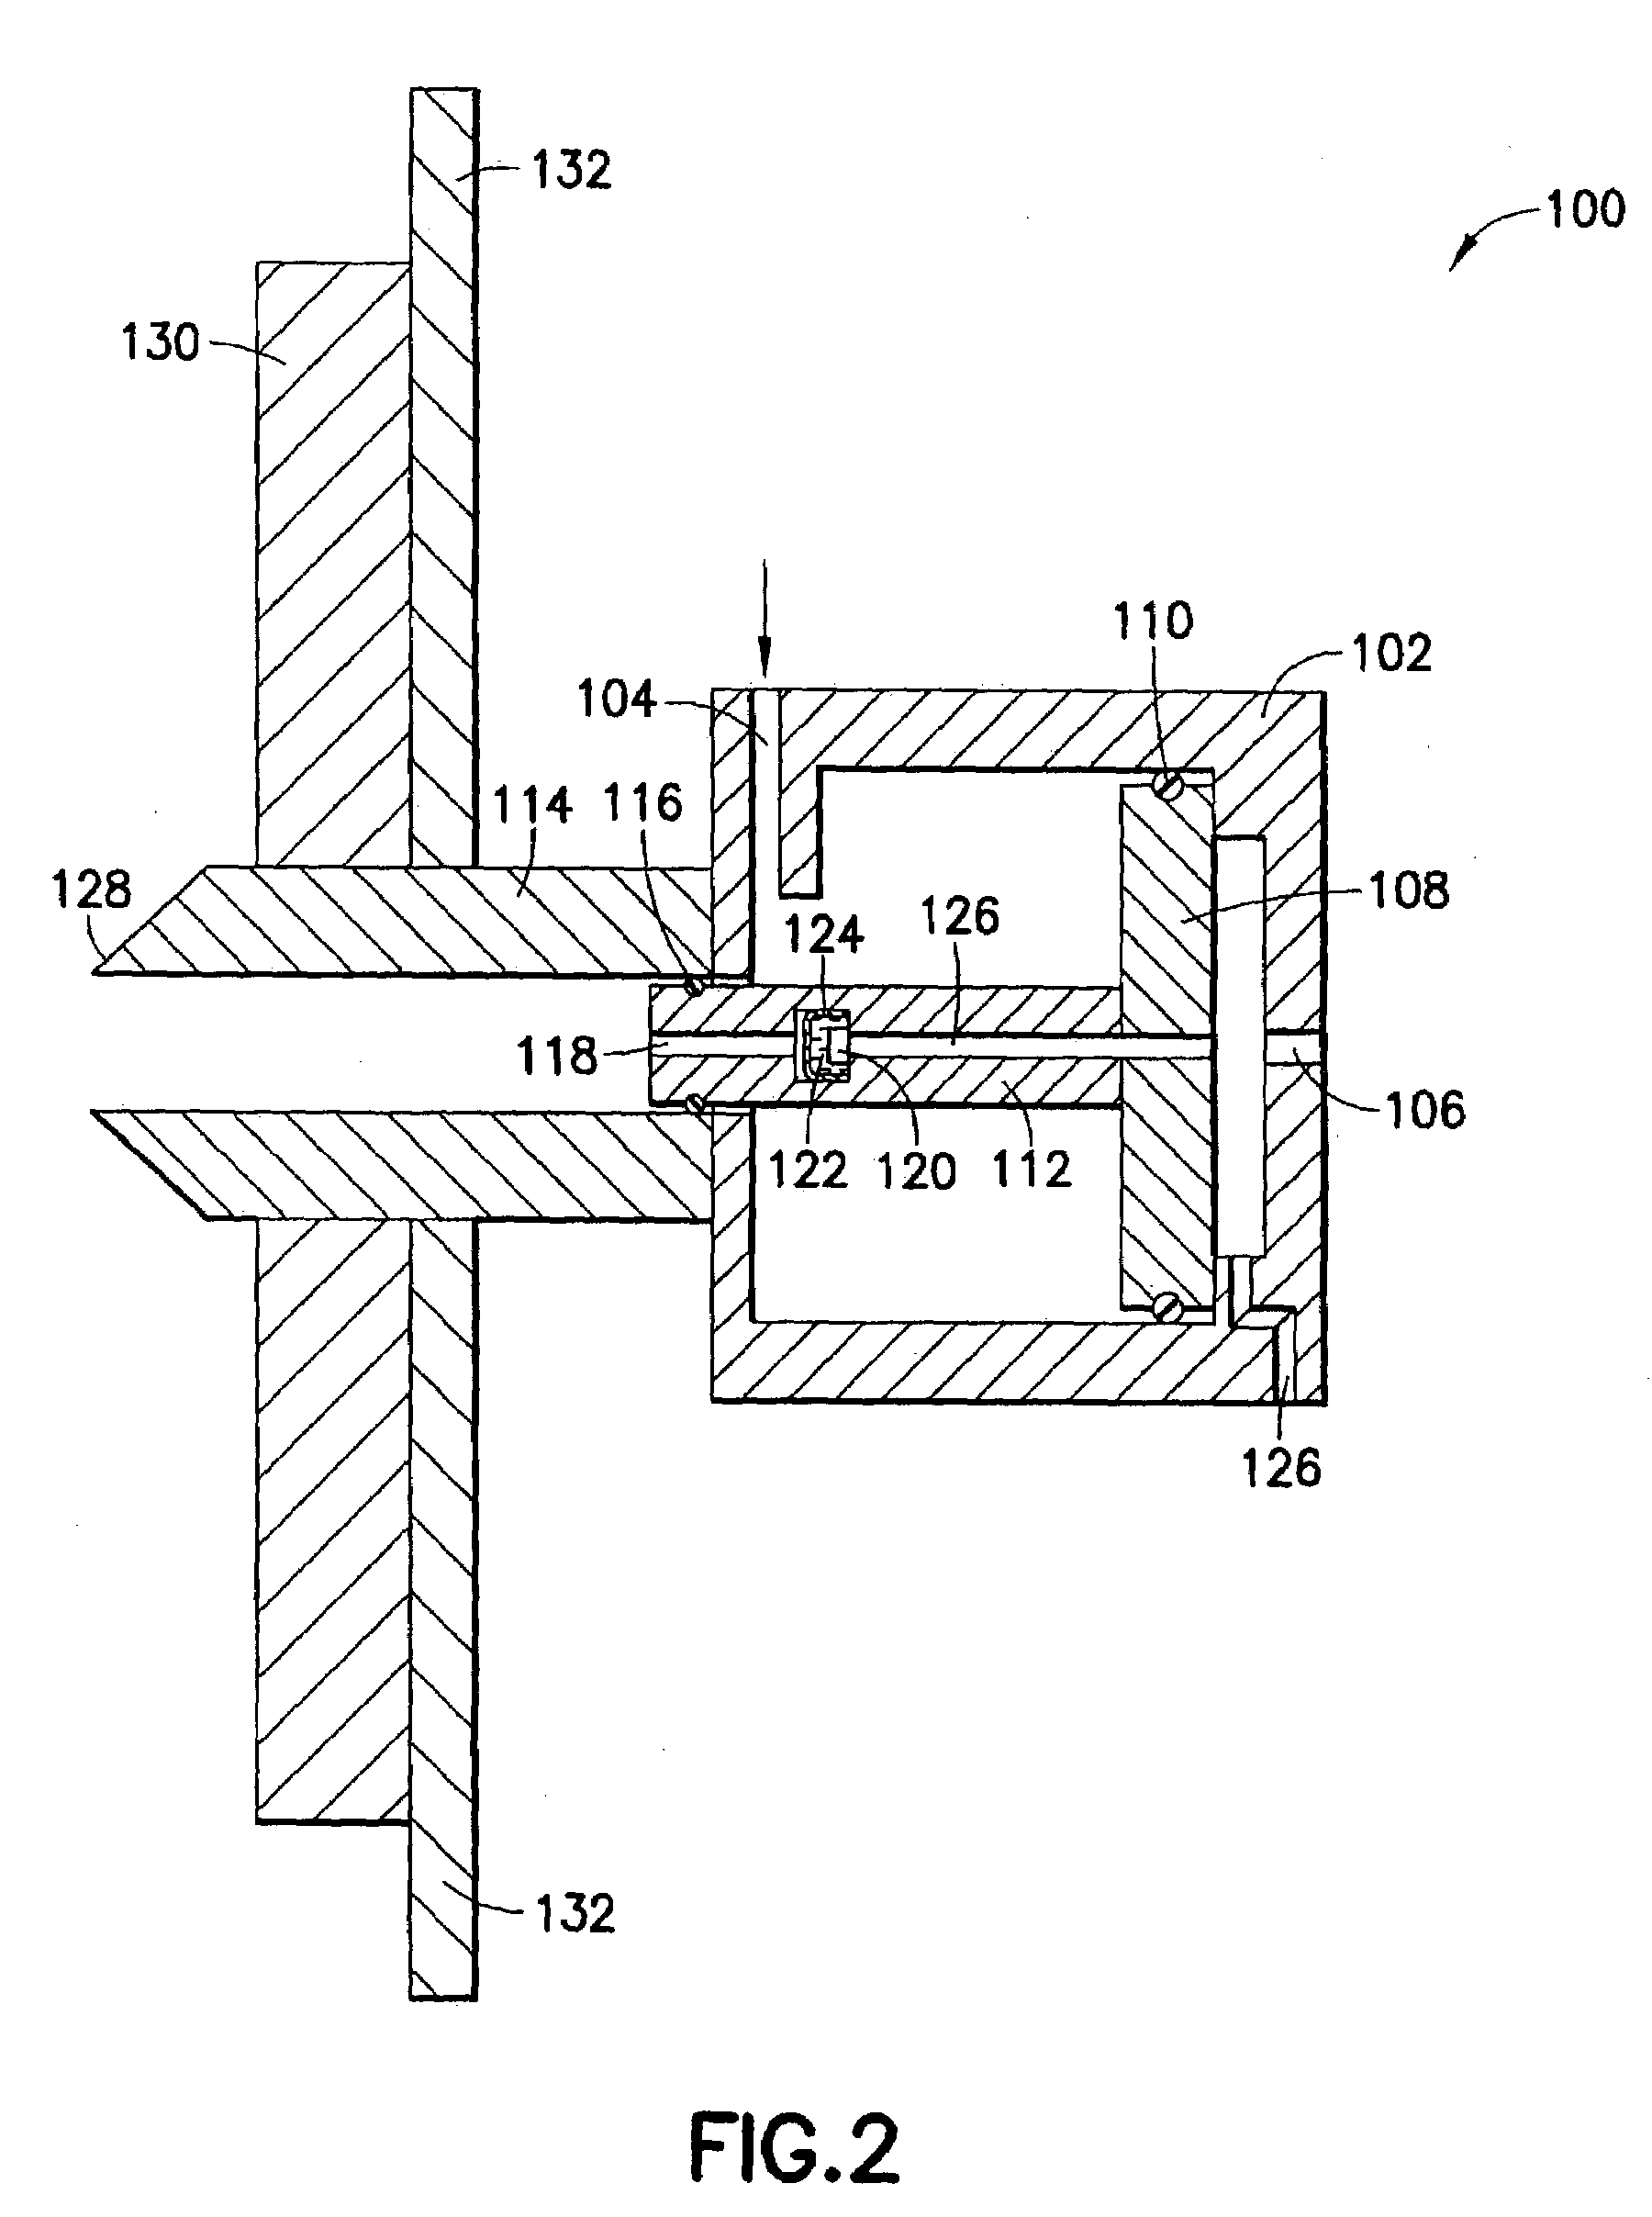 Methods and apparatus for rapidly measuring pressure in earth formations